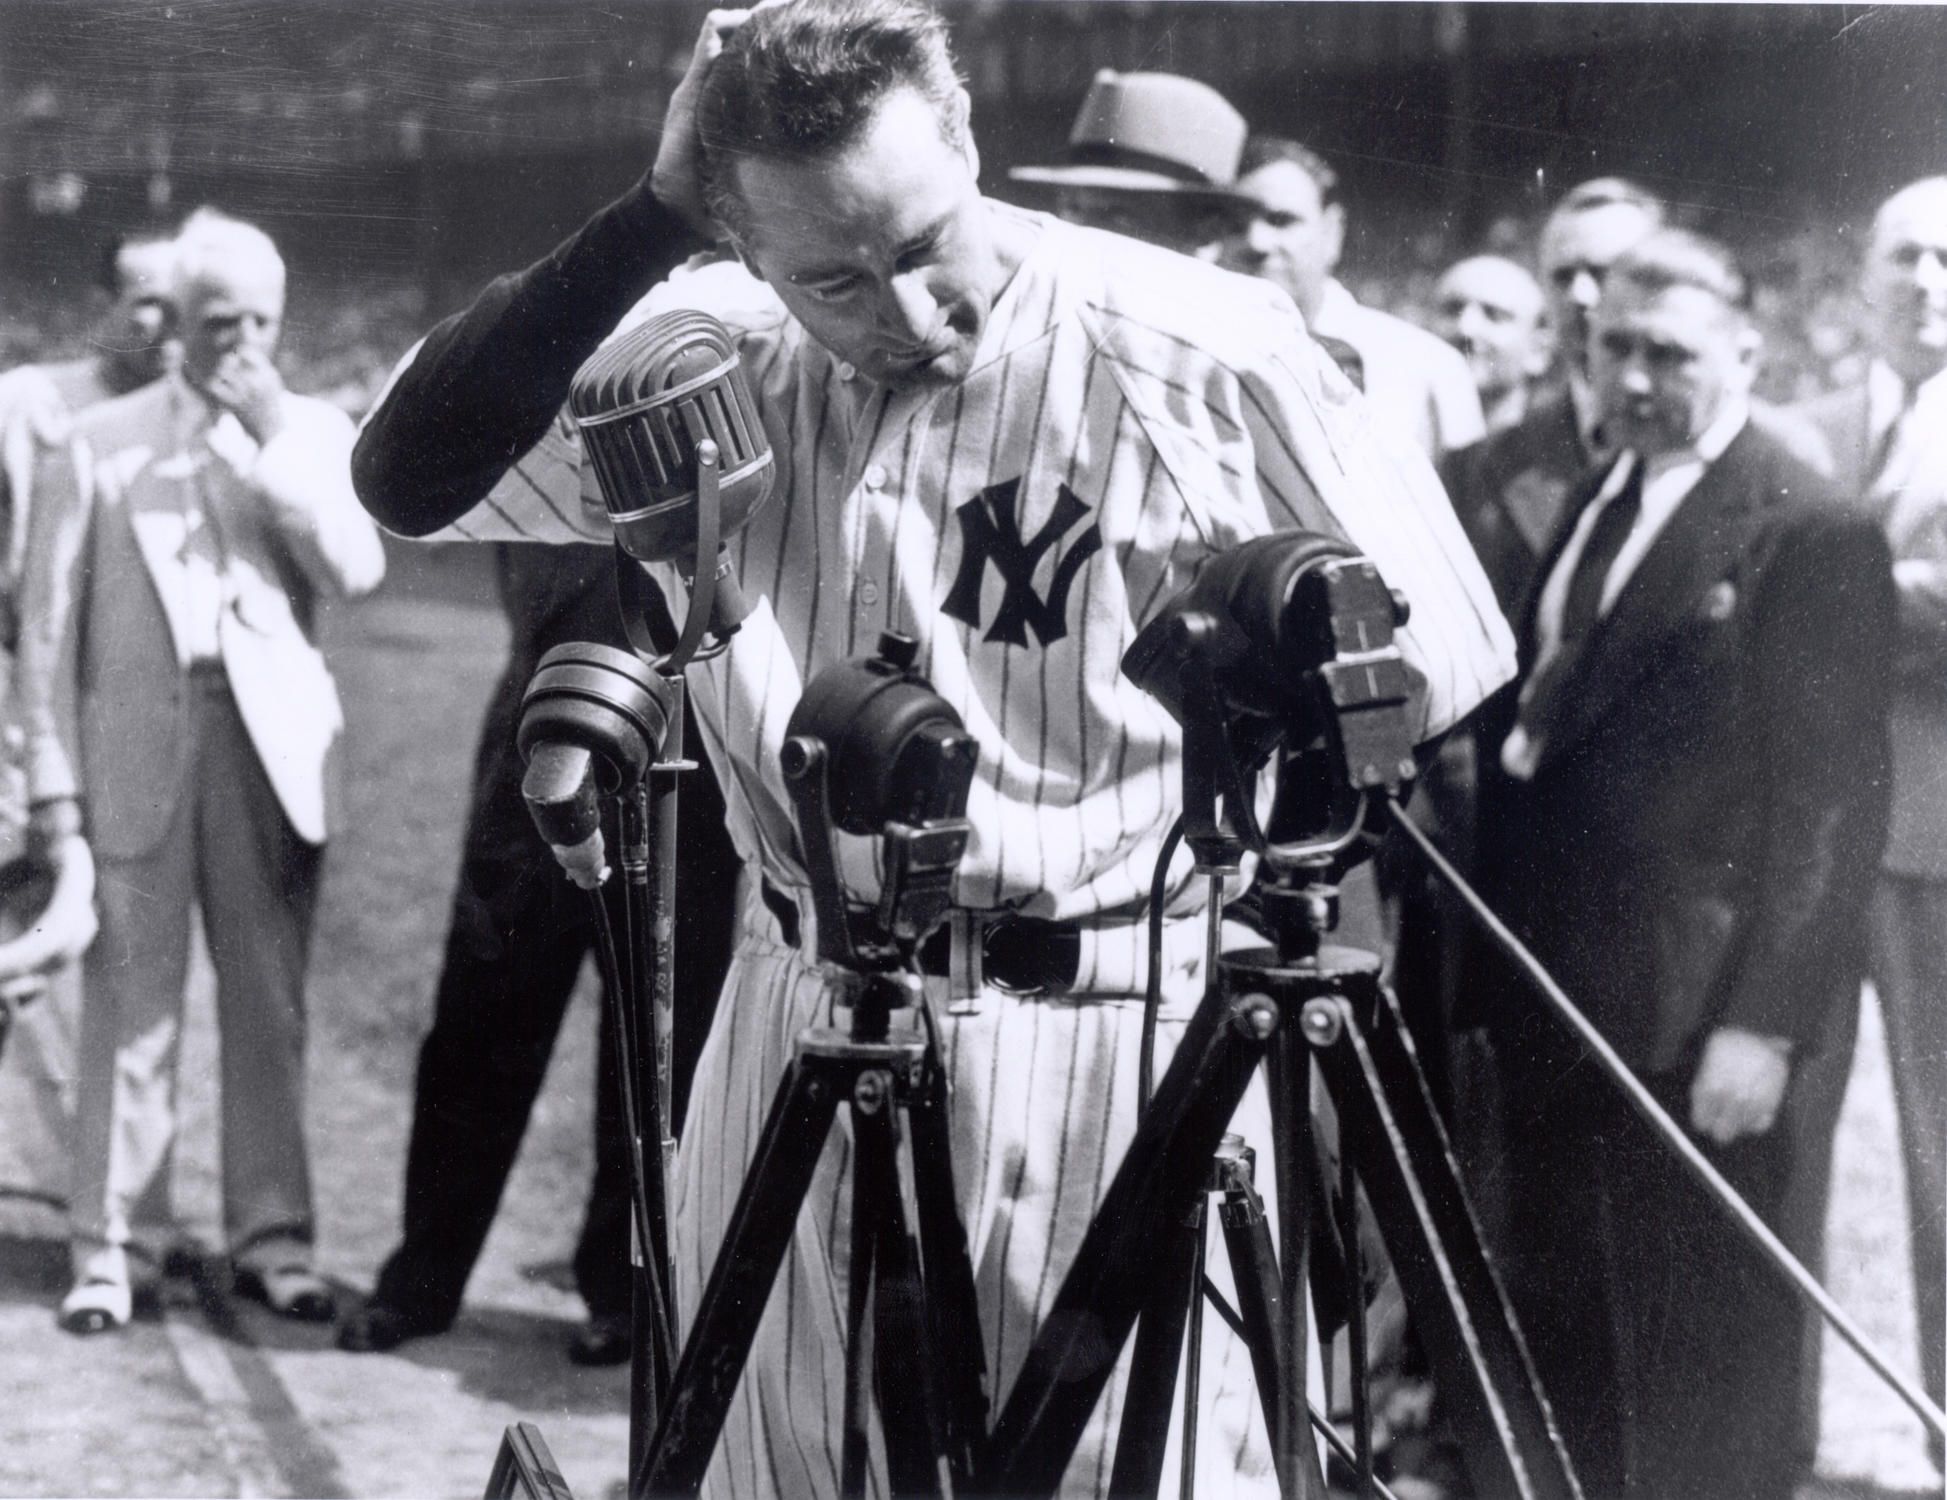 Lou Gehrig's disease: Two profiles of life and courage